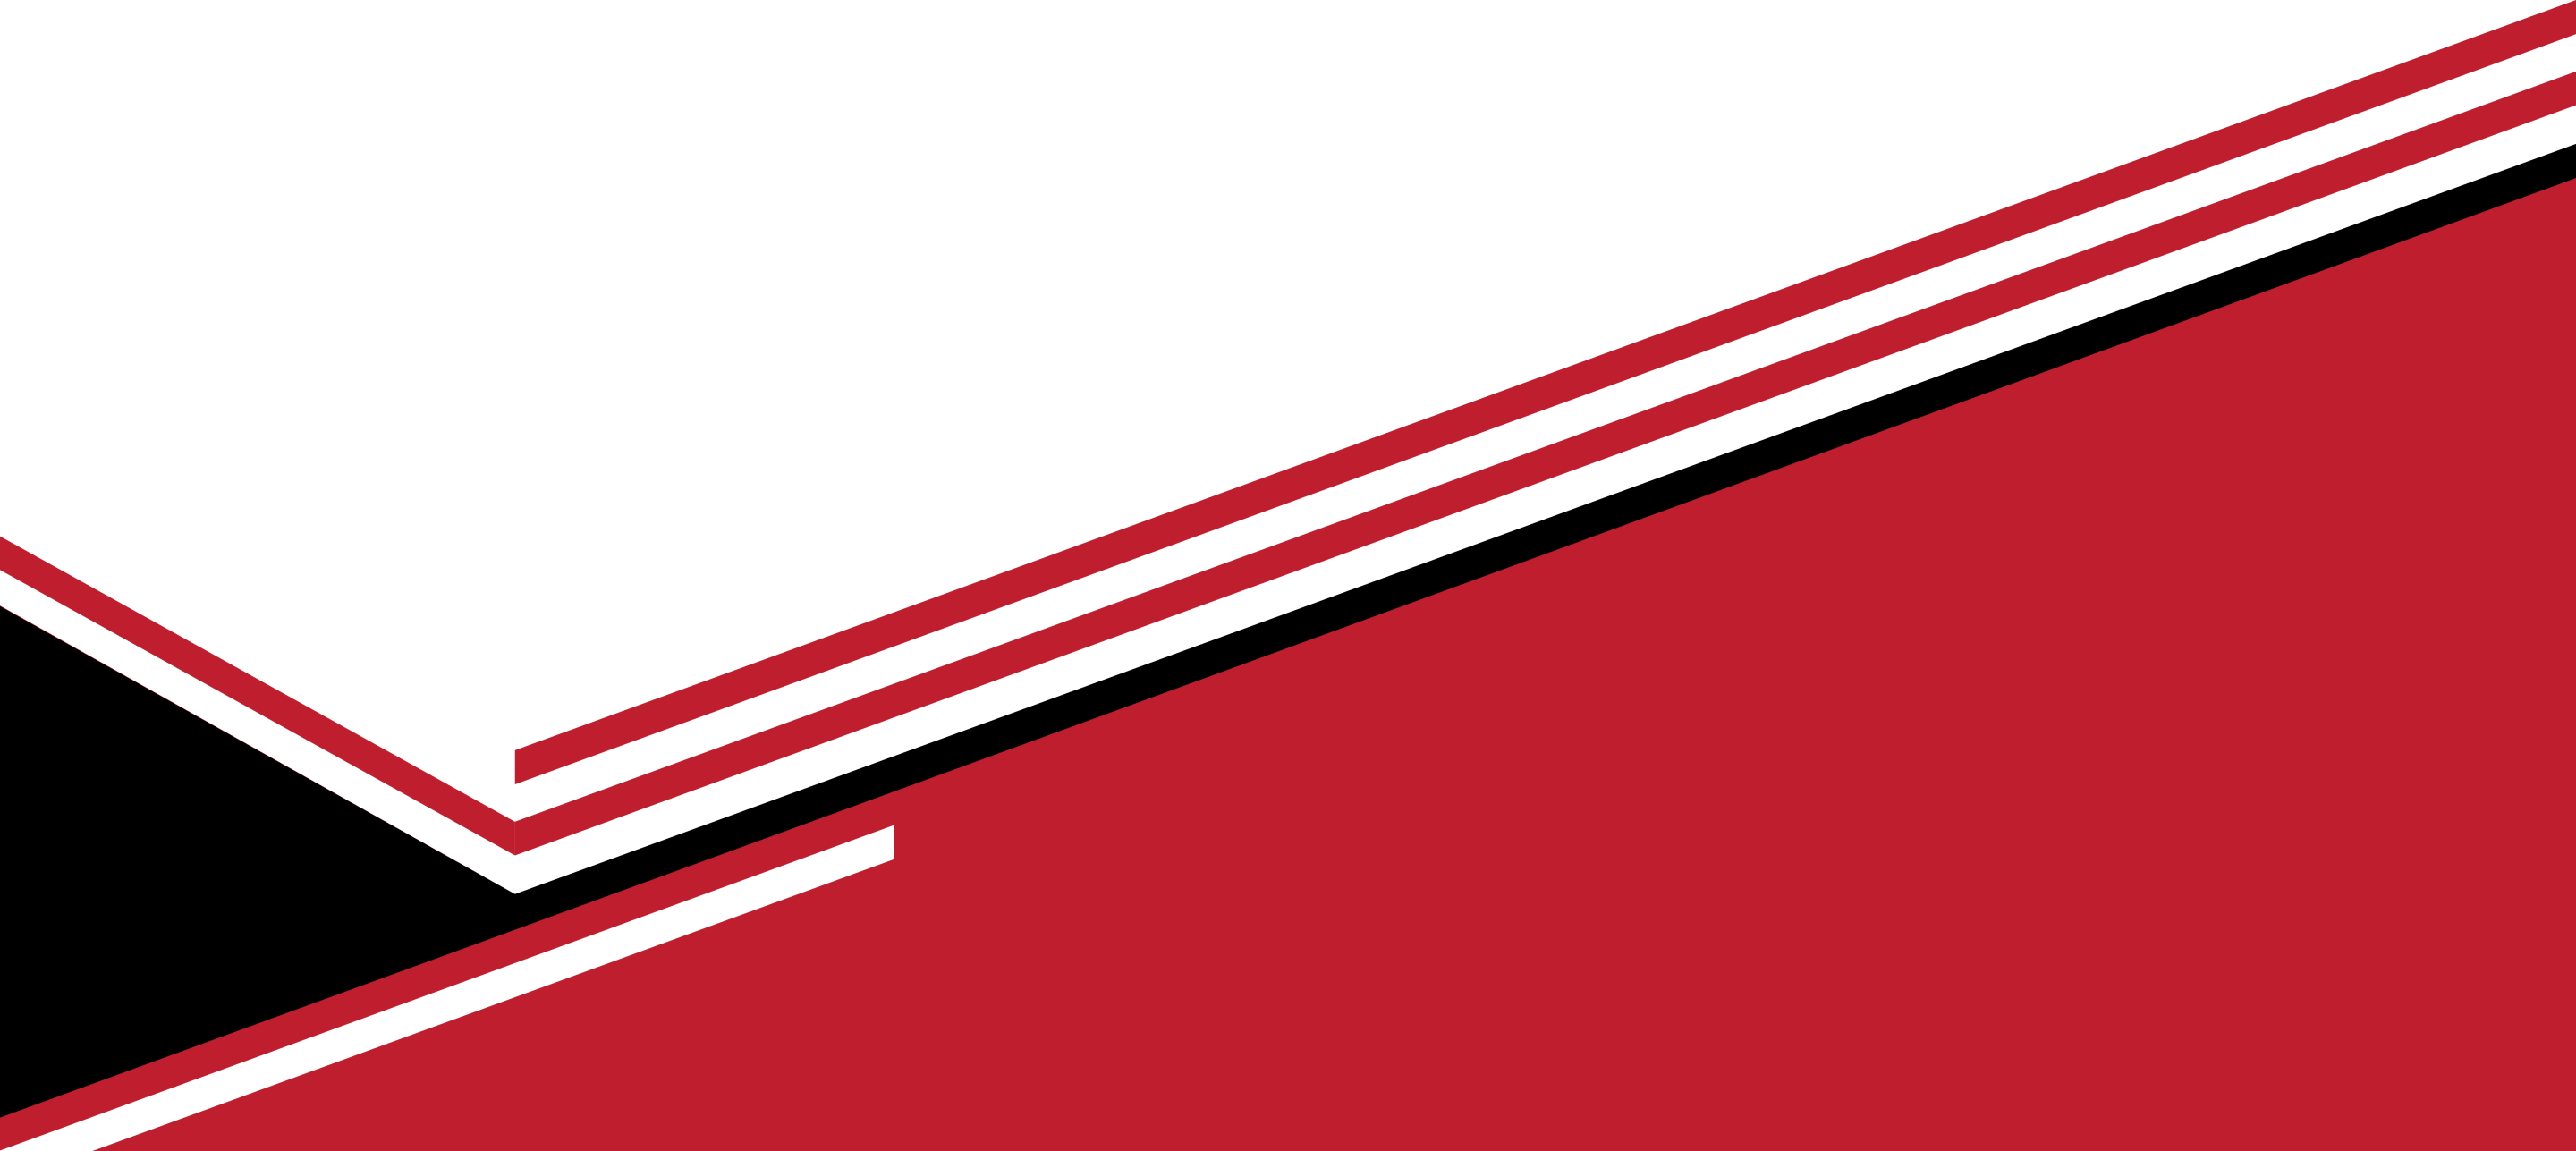 Red Line Png Clipart Image Gallery For Myreal